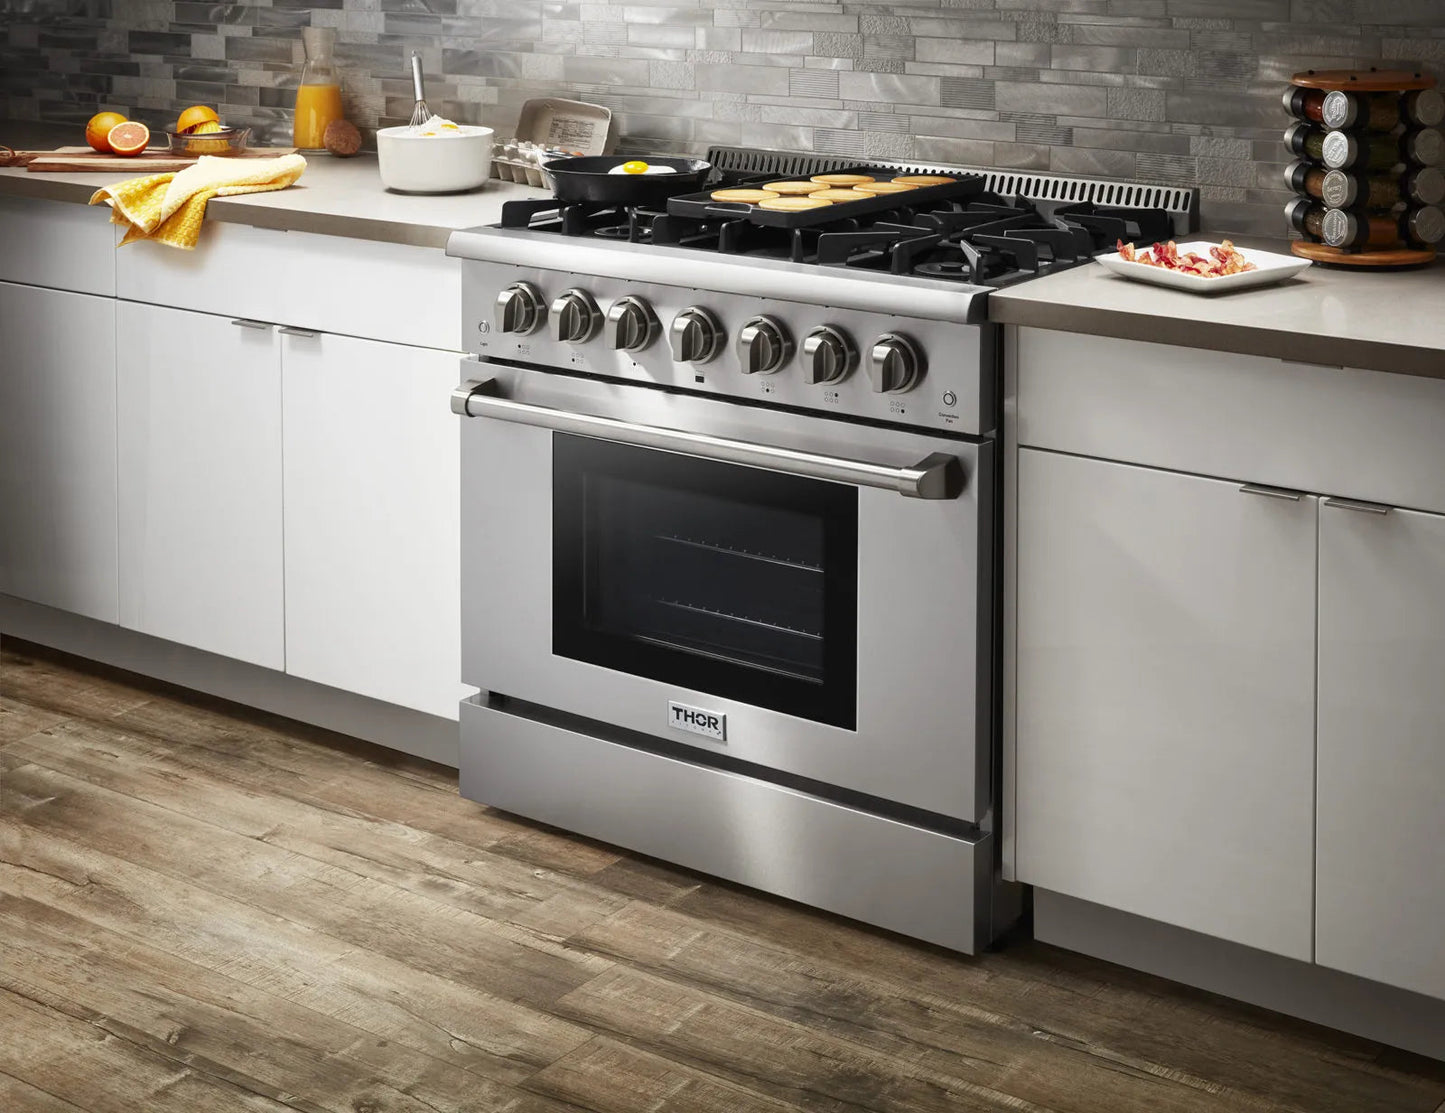 Thor 36 Inch Professional Gas Range In Stainless Steel